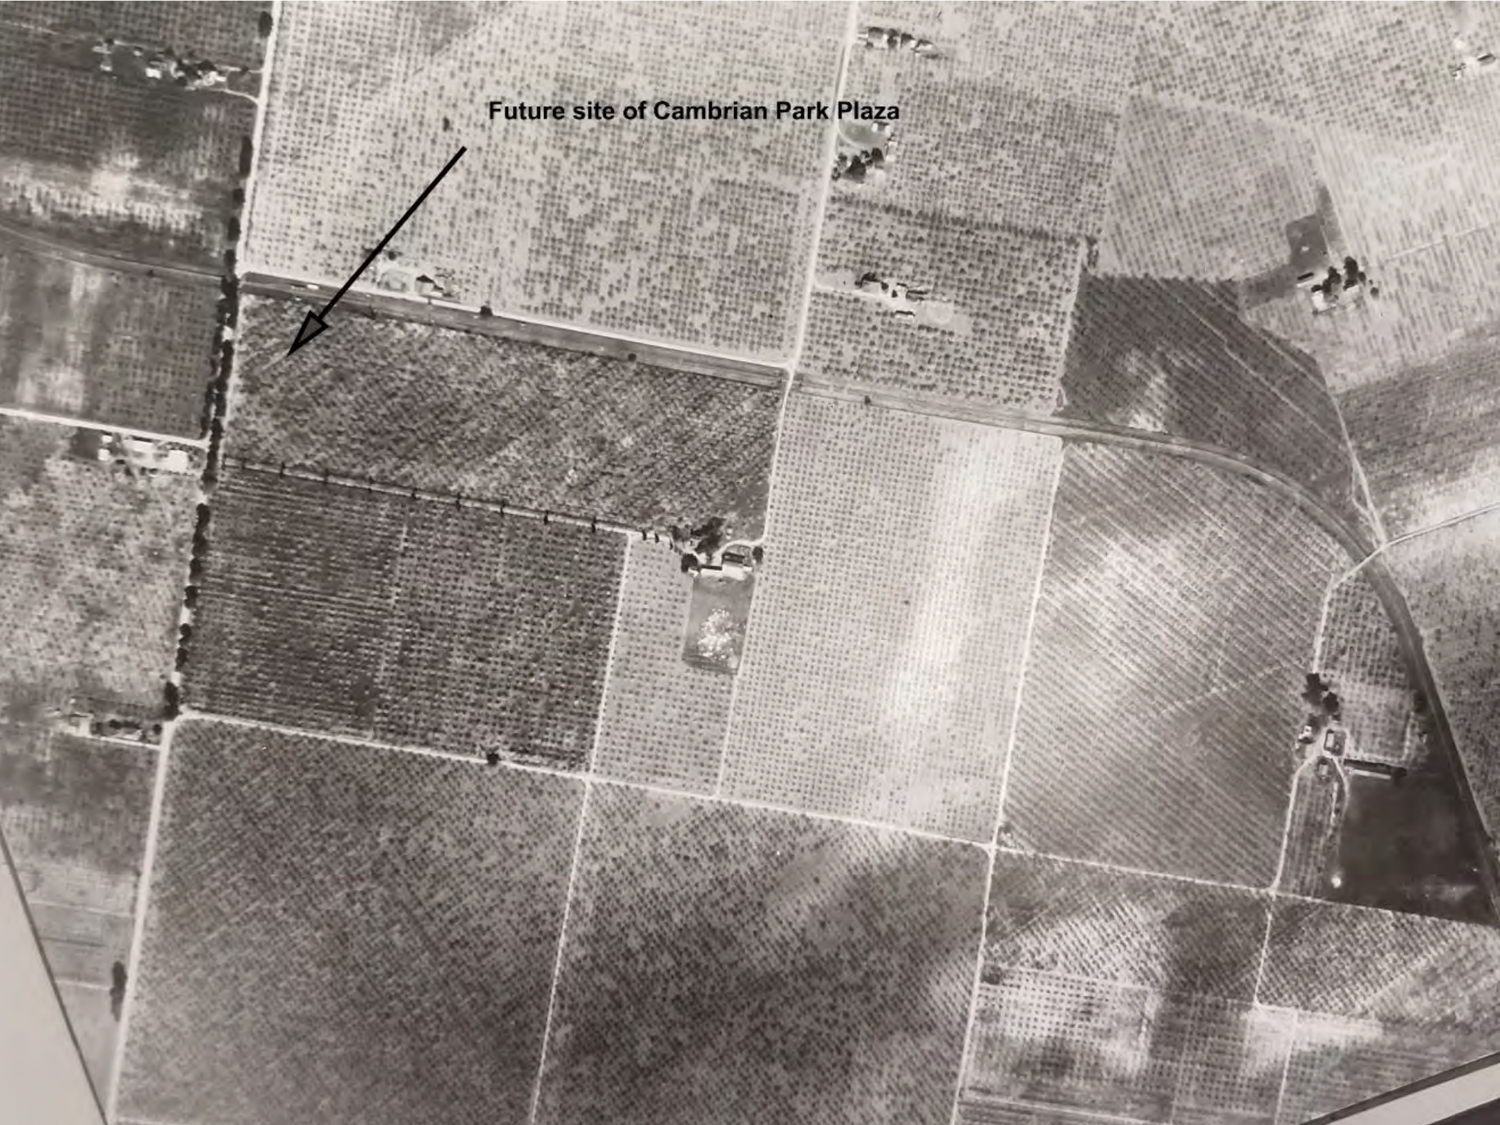 1931 USGS aerial showing future site of Cambrian Park Plaza, image via CEQA Documents